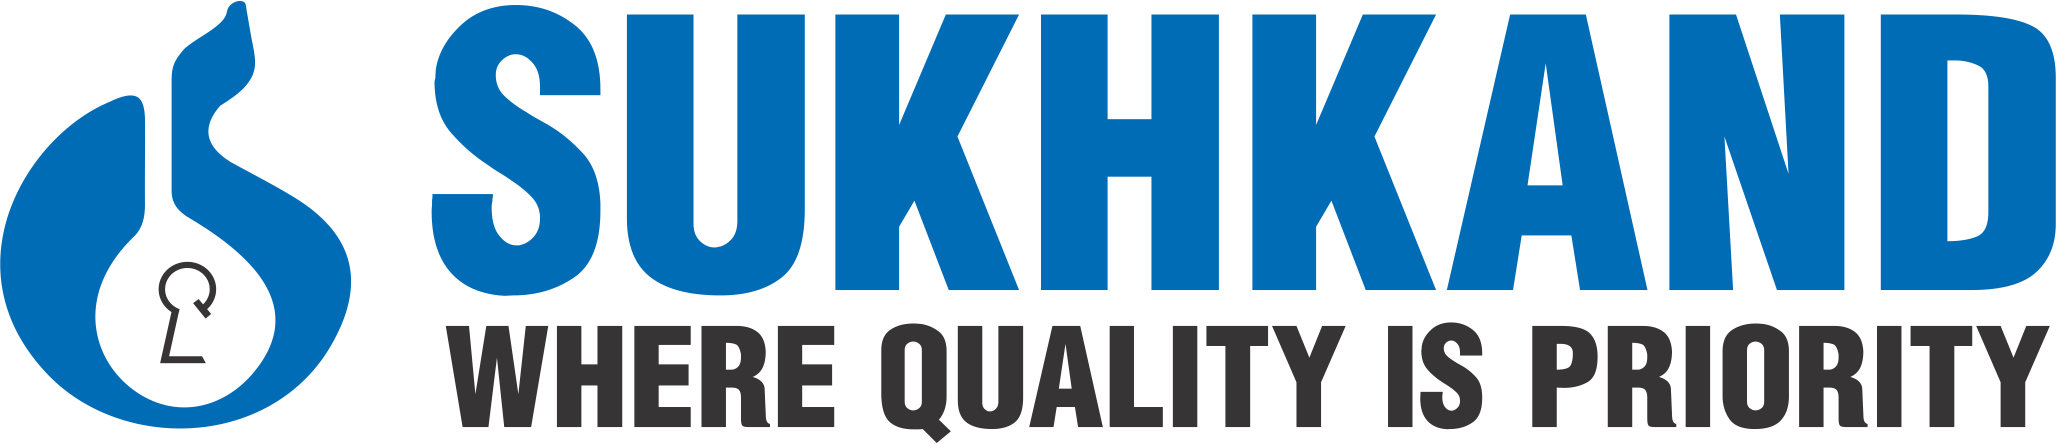 SUKHKAND | WHERE QUALITY IS PRIORITY